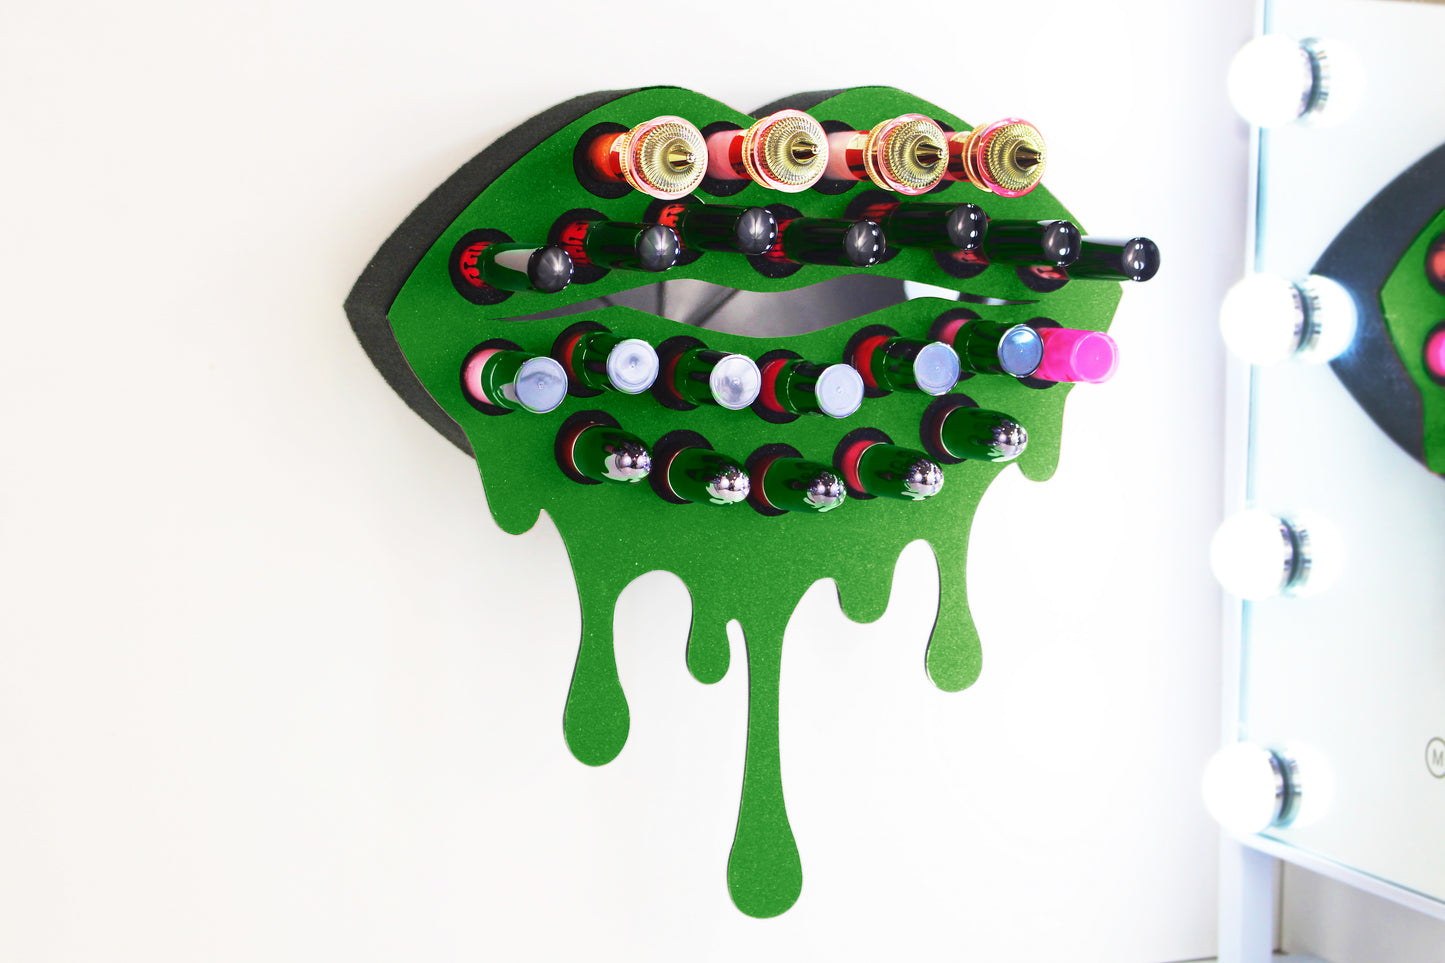 Green Medium Lip Design Lipstick Organizer holding 23 lipsticks mounted on the wall, keeping lipstick organized and easy to reach. This wall mounted makeup organizer looks like art on the wall of your bathroom or makeup room.